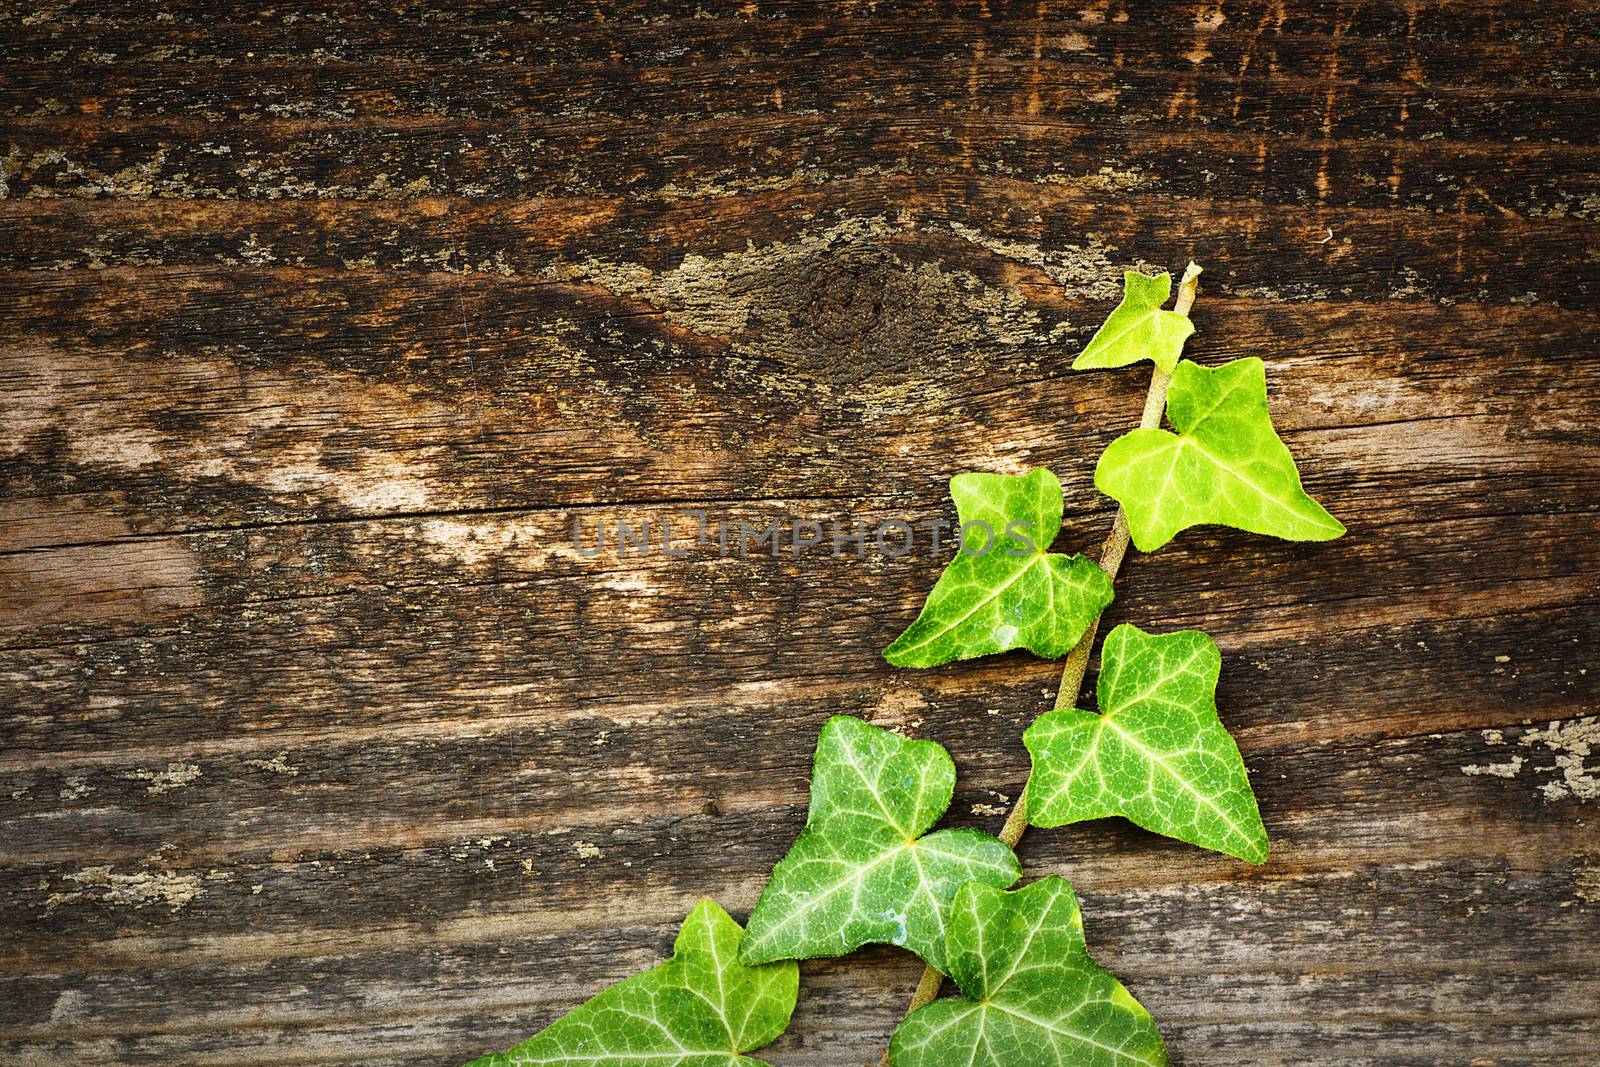 green wild ivy growing on wooden fence, beautiful contrast on natural wood texture